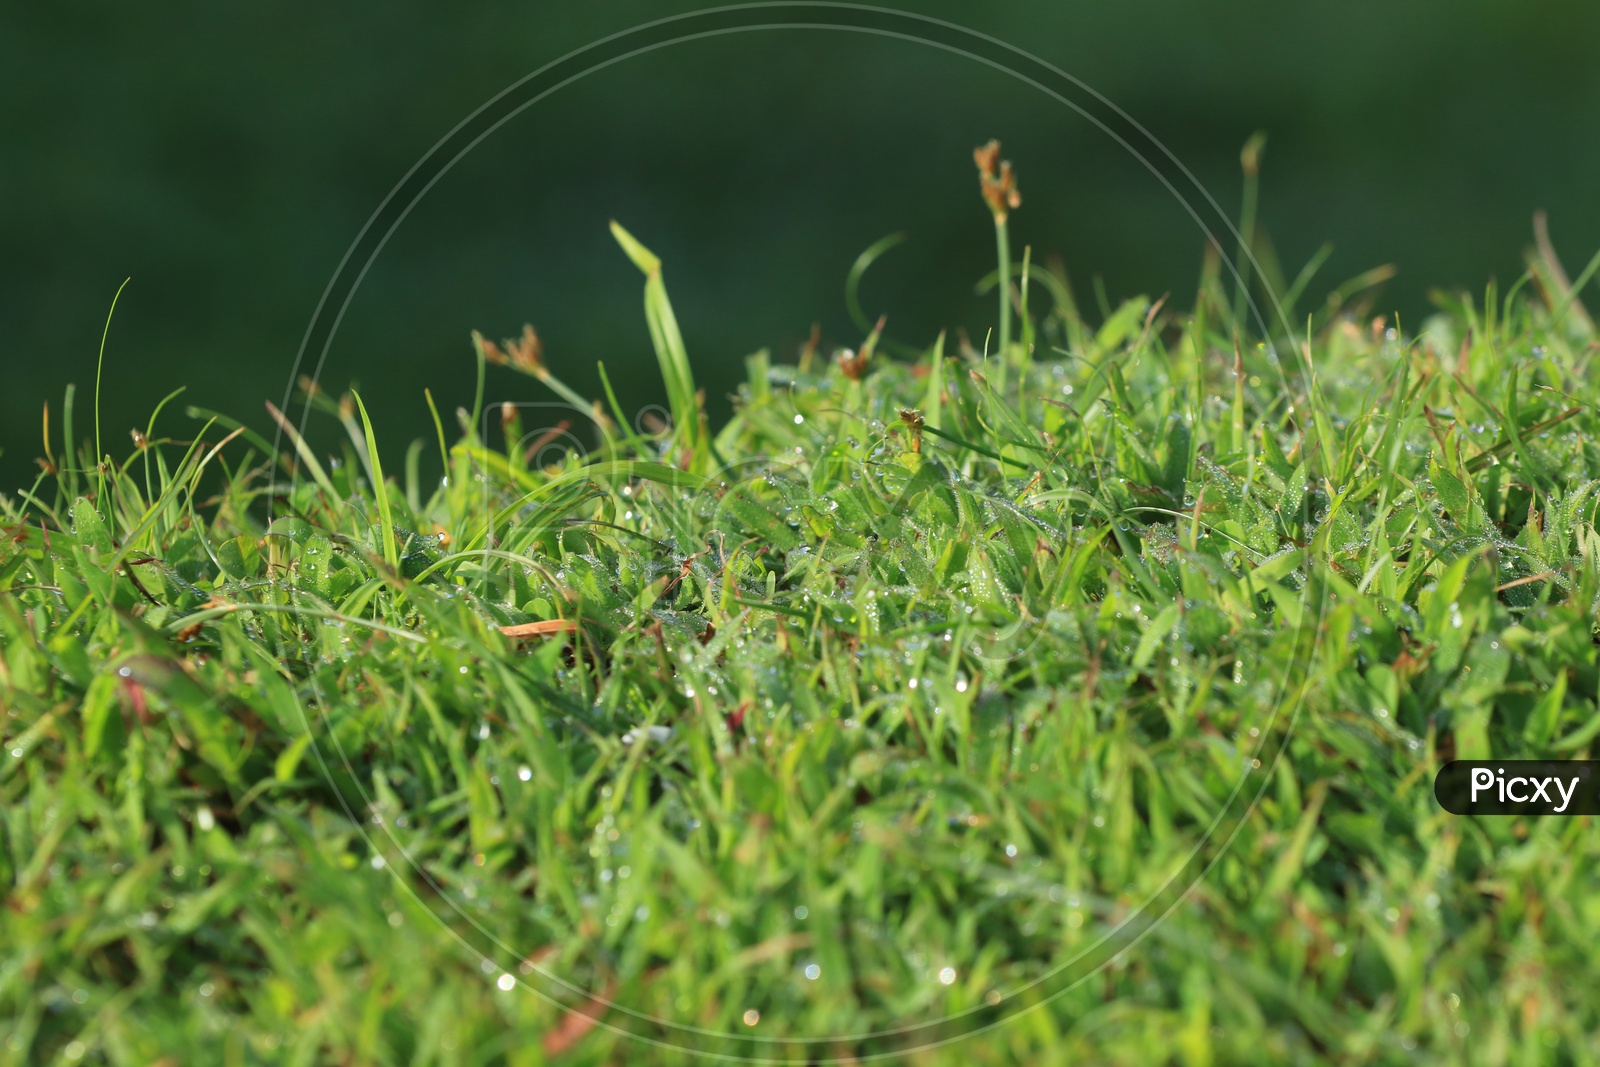 Dew/water droplets on green grass